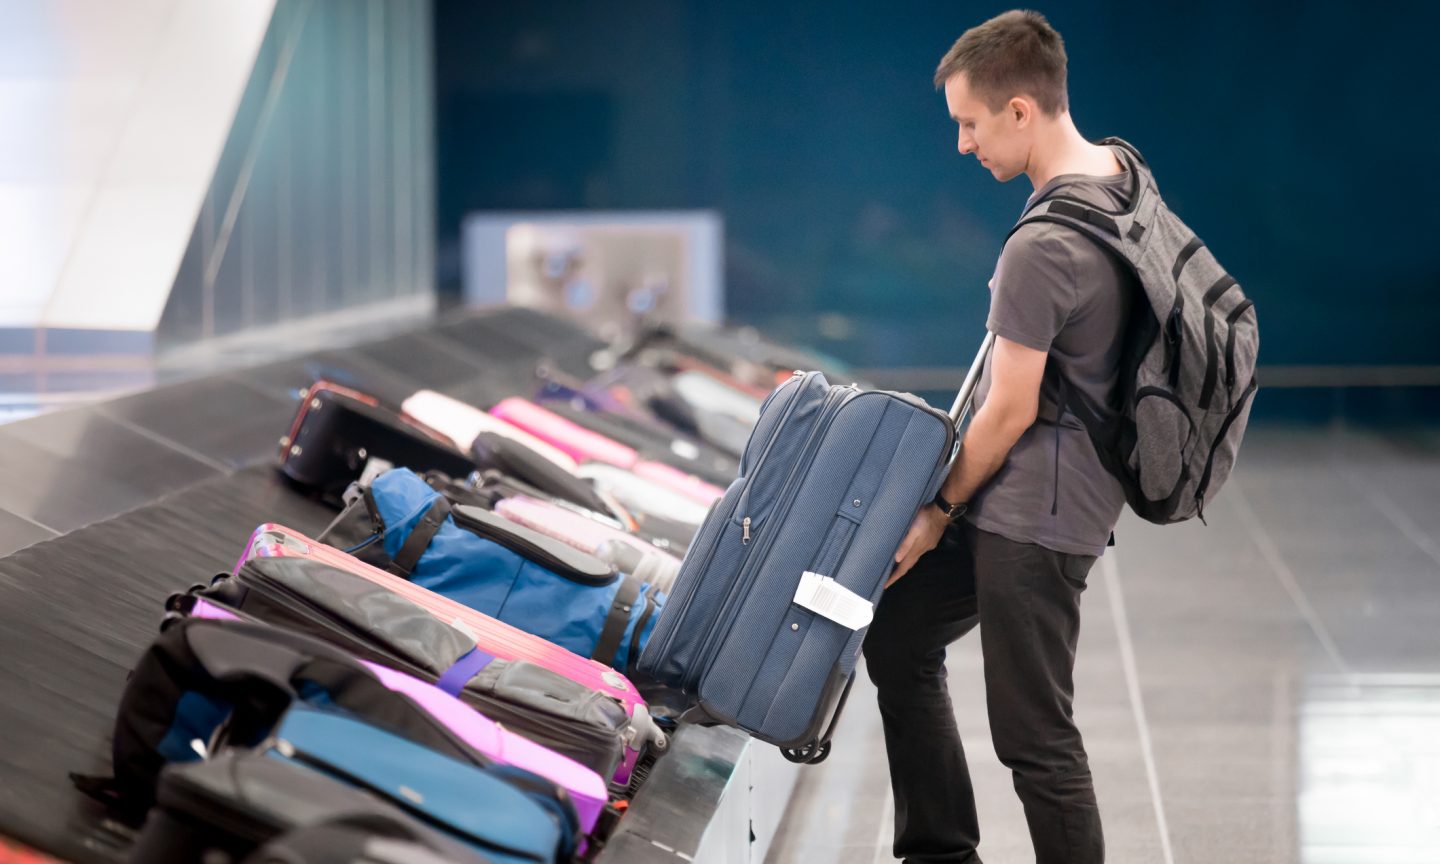 Carry On Luggage Weight Limits for Airline Baggage in 2023